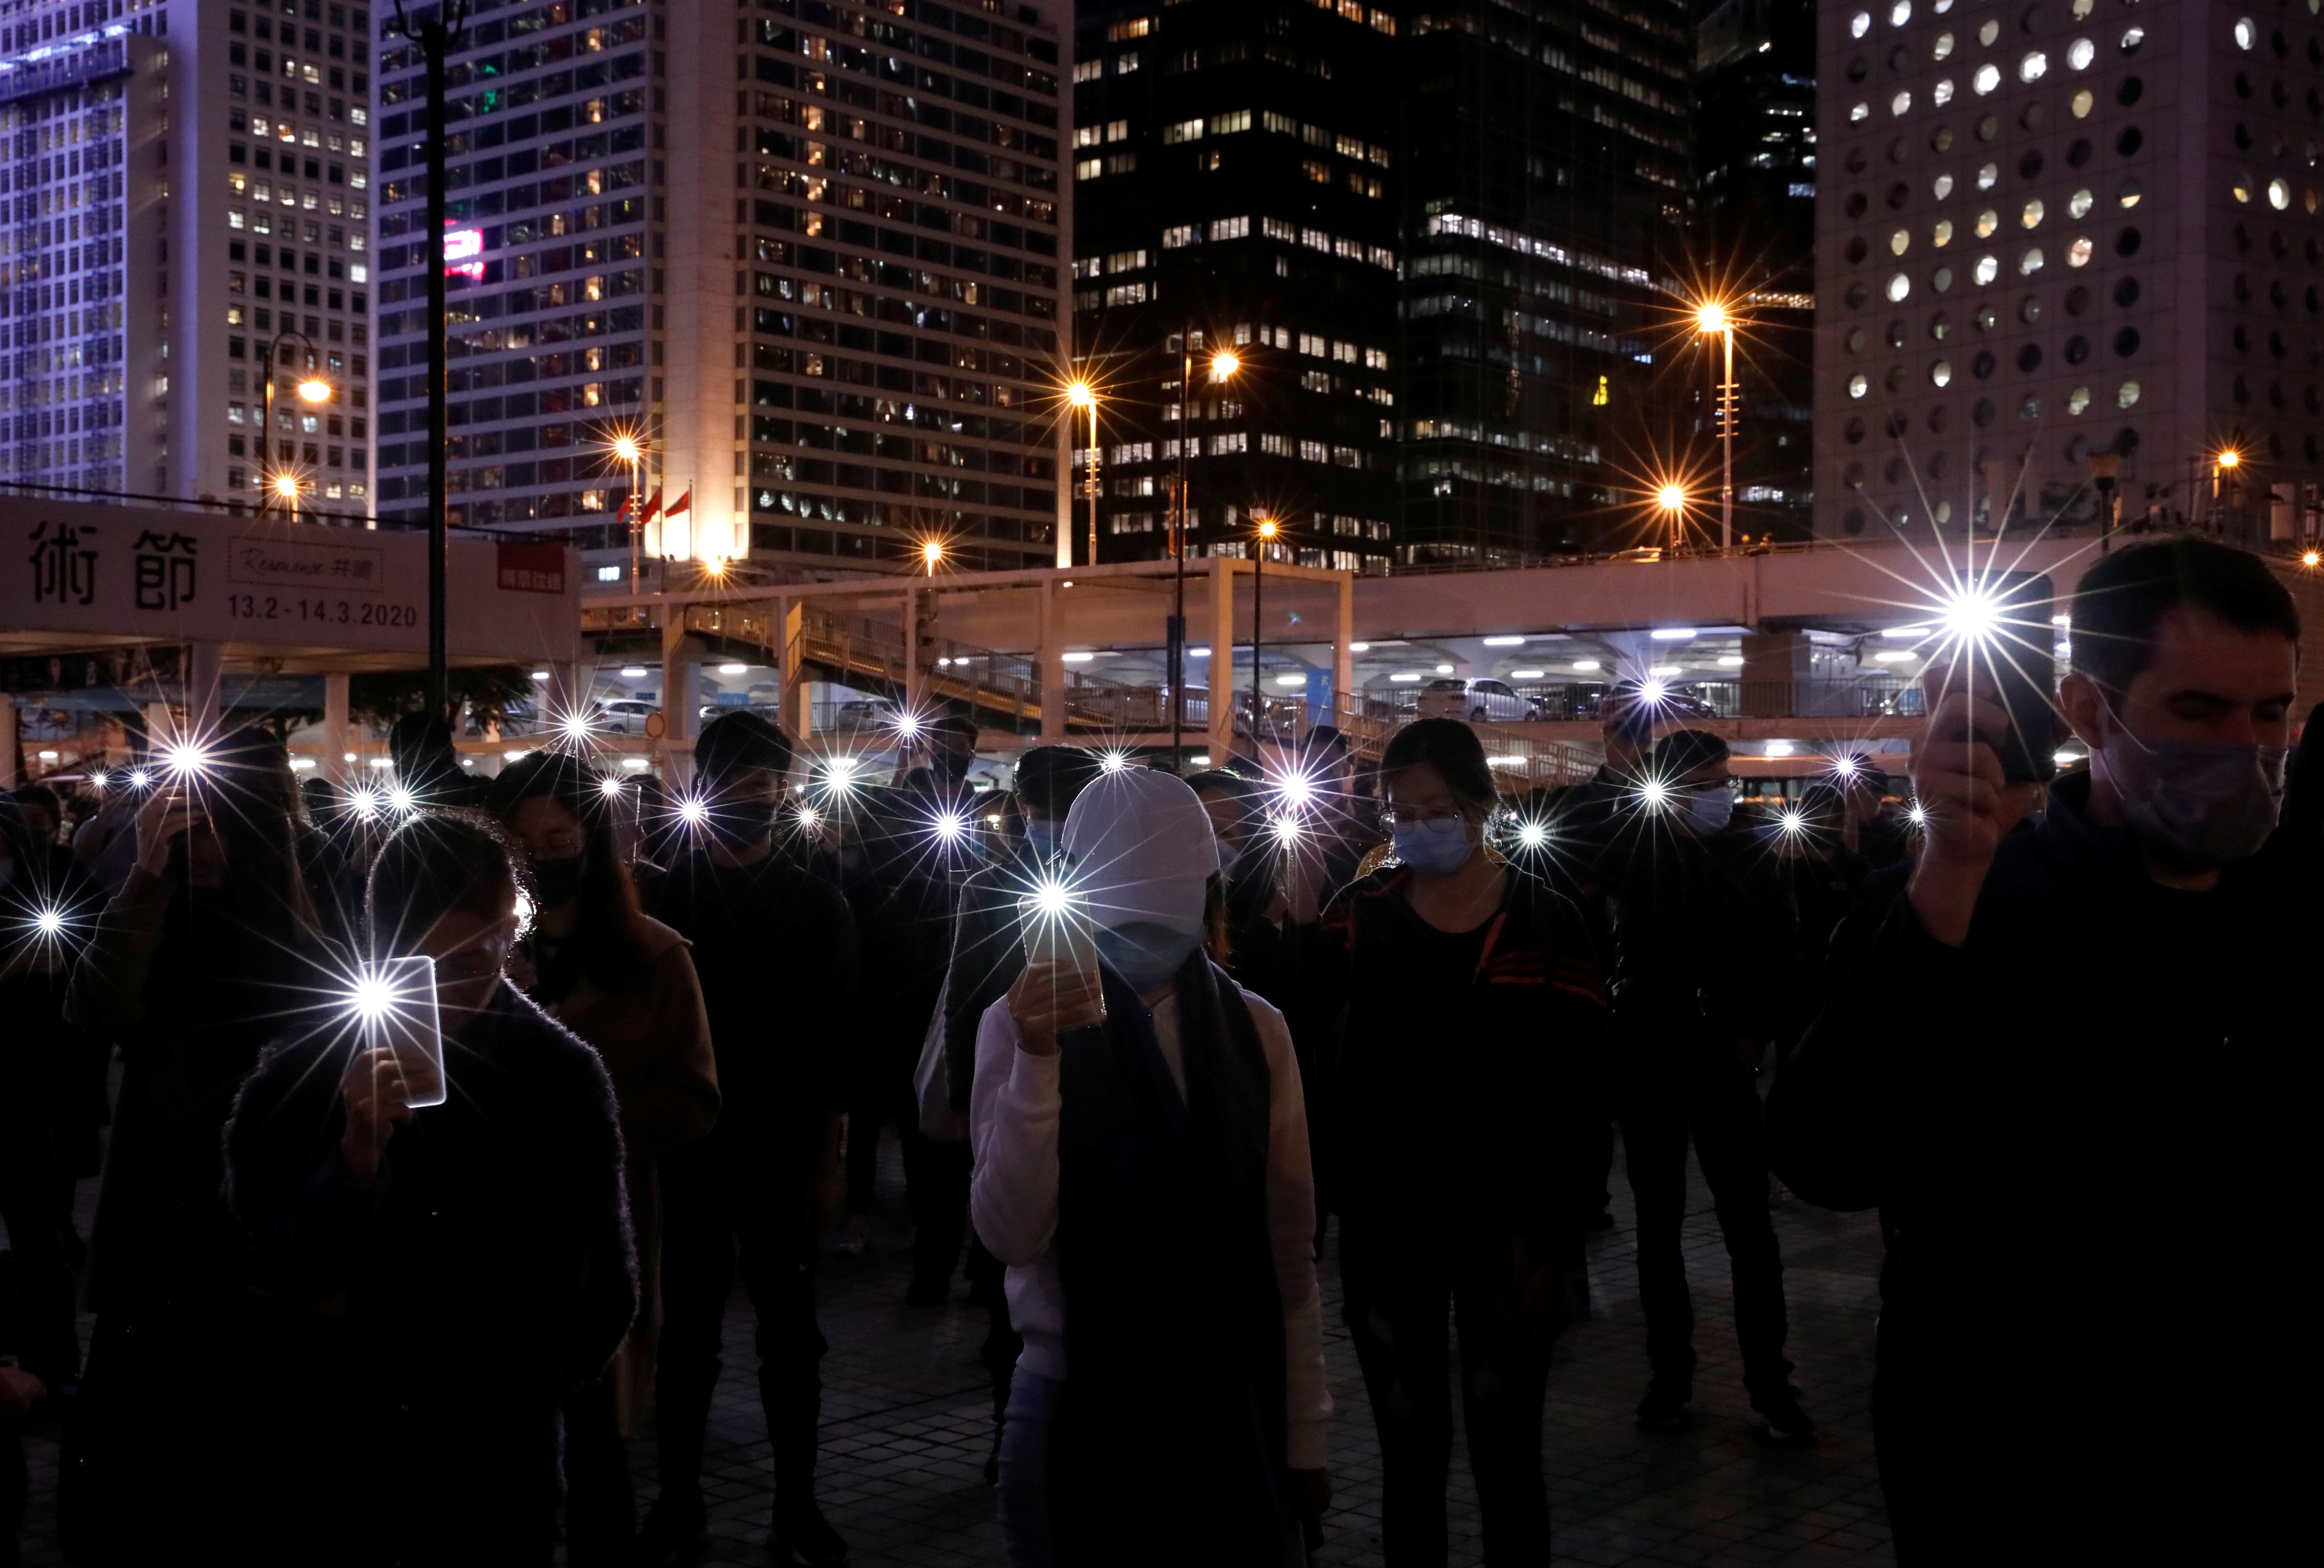 Anti-government demonstrators take part in a protest in Edinburgh Place in Hong Kong on December 30. Photo: Reuters